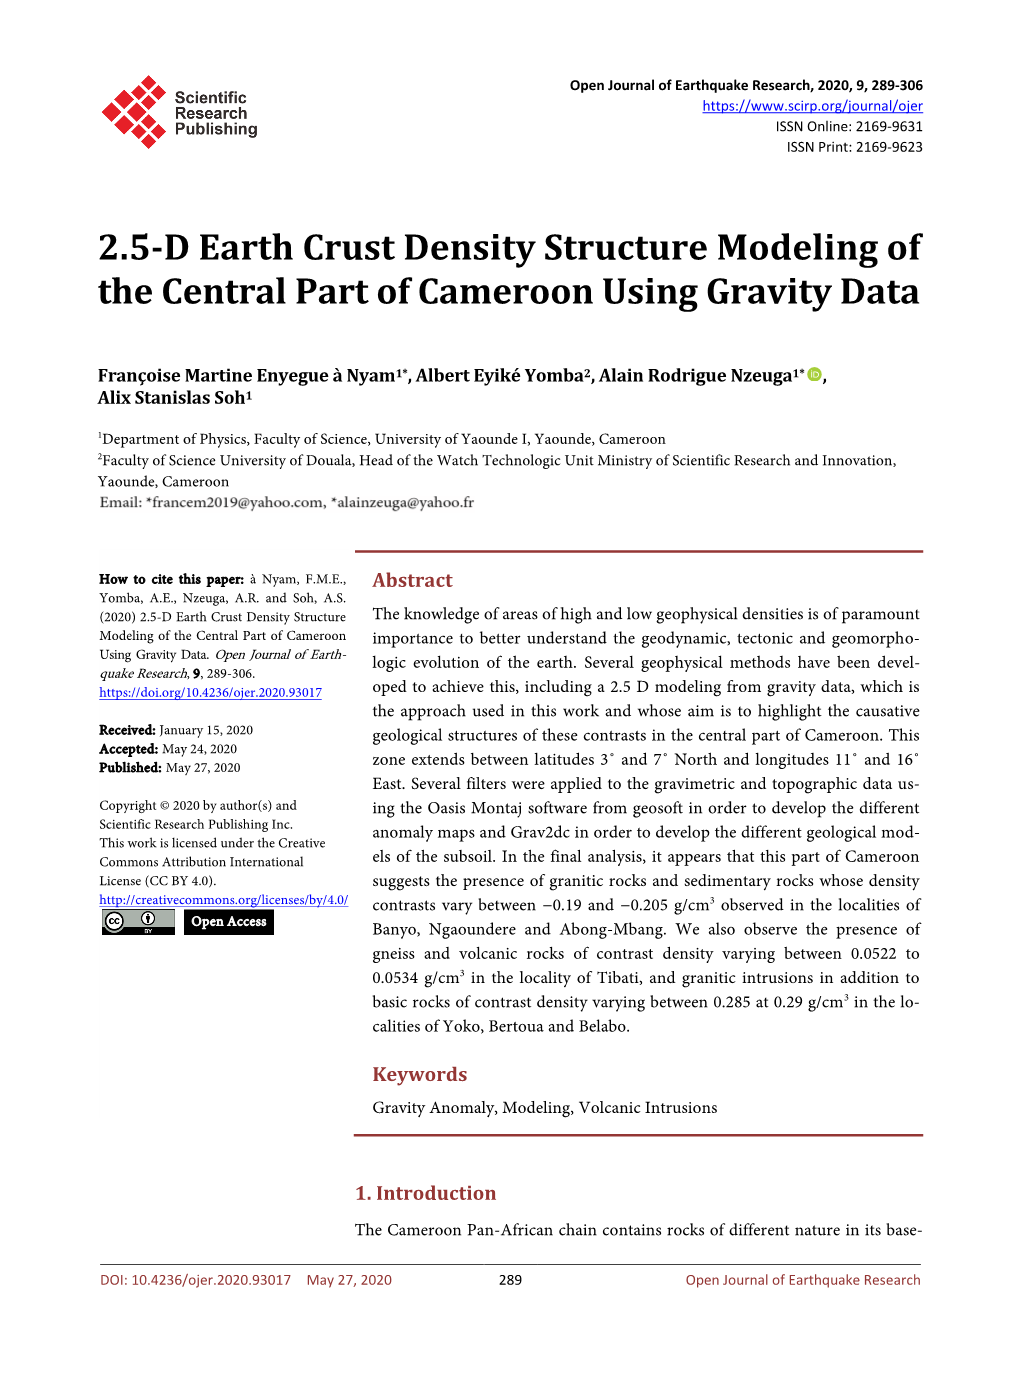 2.5-D Earth Crust Density Structure Modeling of the Central Part of Cameroon Using Gravity Data